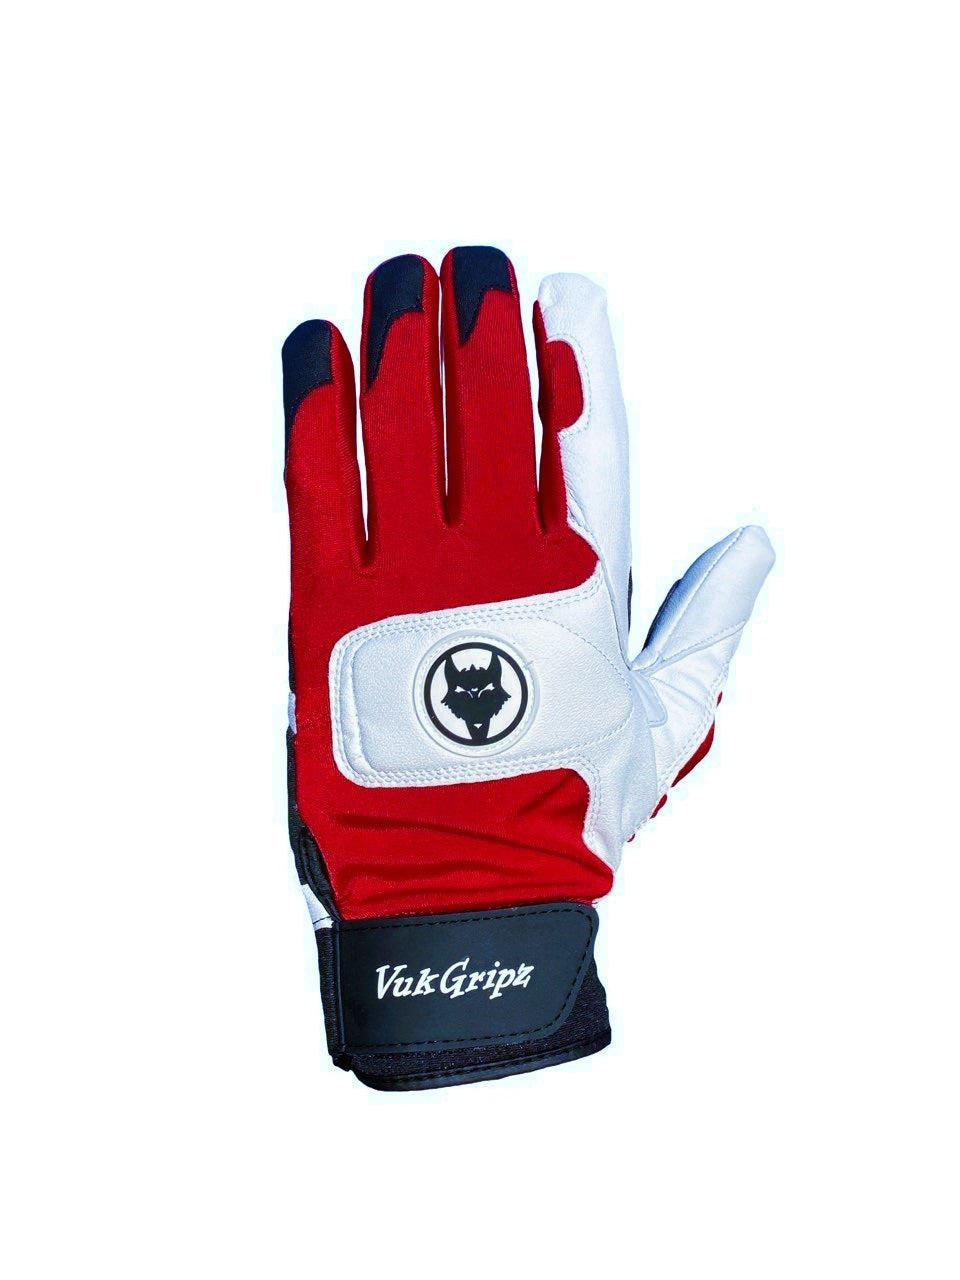 Front view of VukGripz Alpha 2.0 Red Batting Gloves featuring white logo and black strap